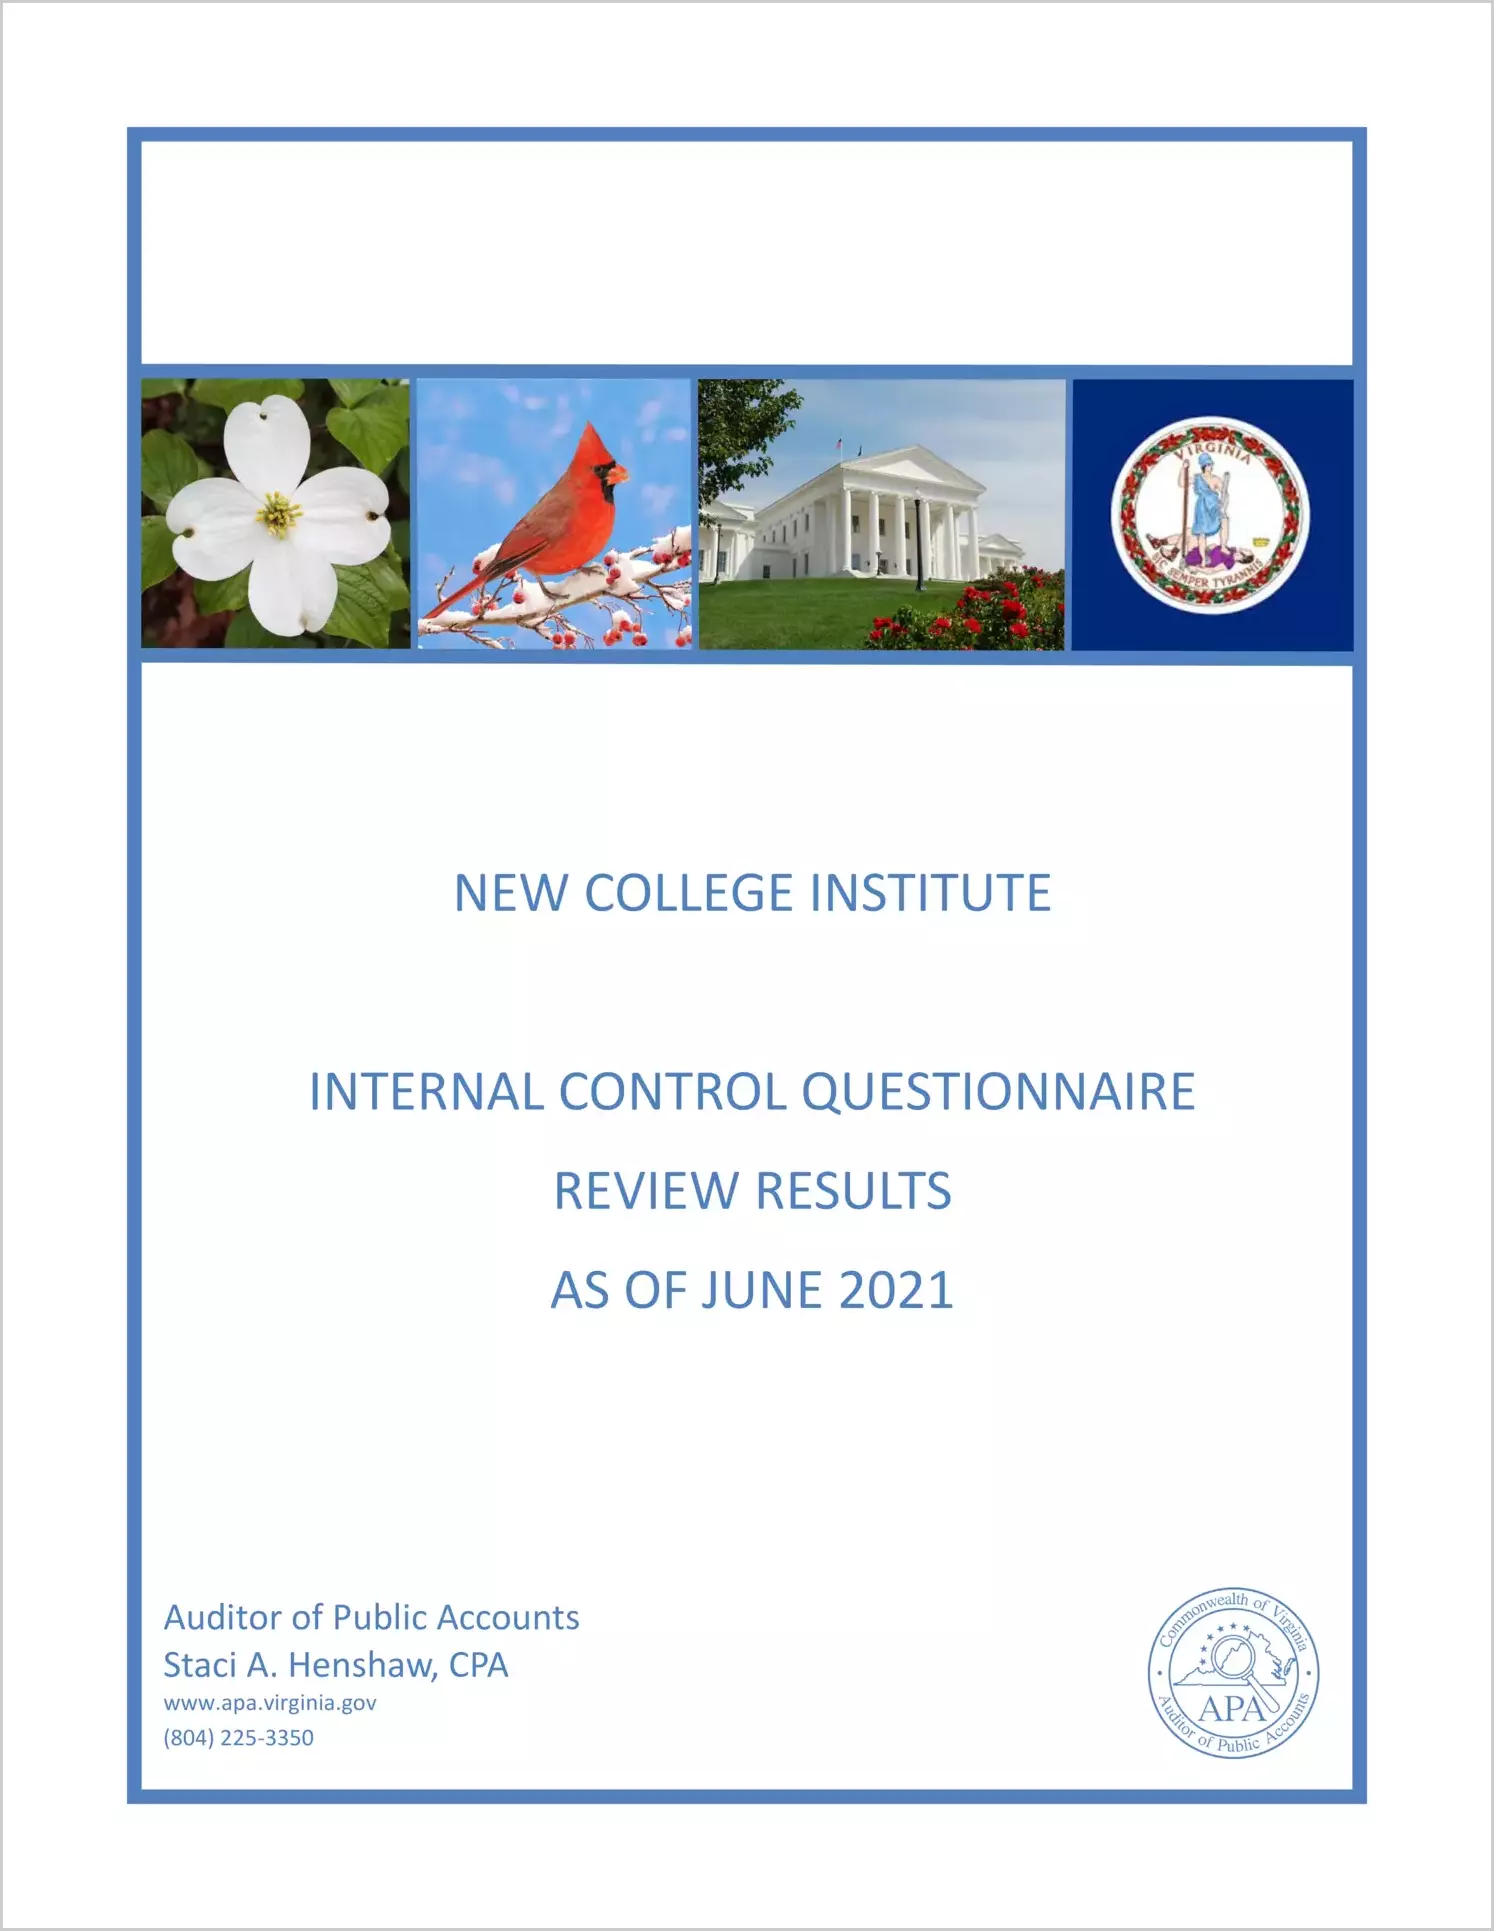 New College Institute Internal Control Questionnaire Review Results as of June 2021